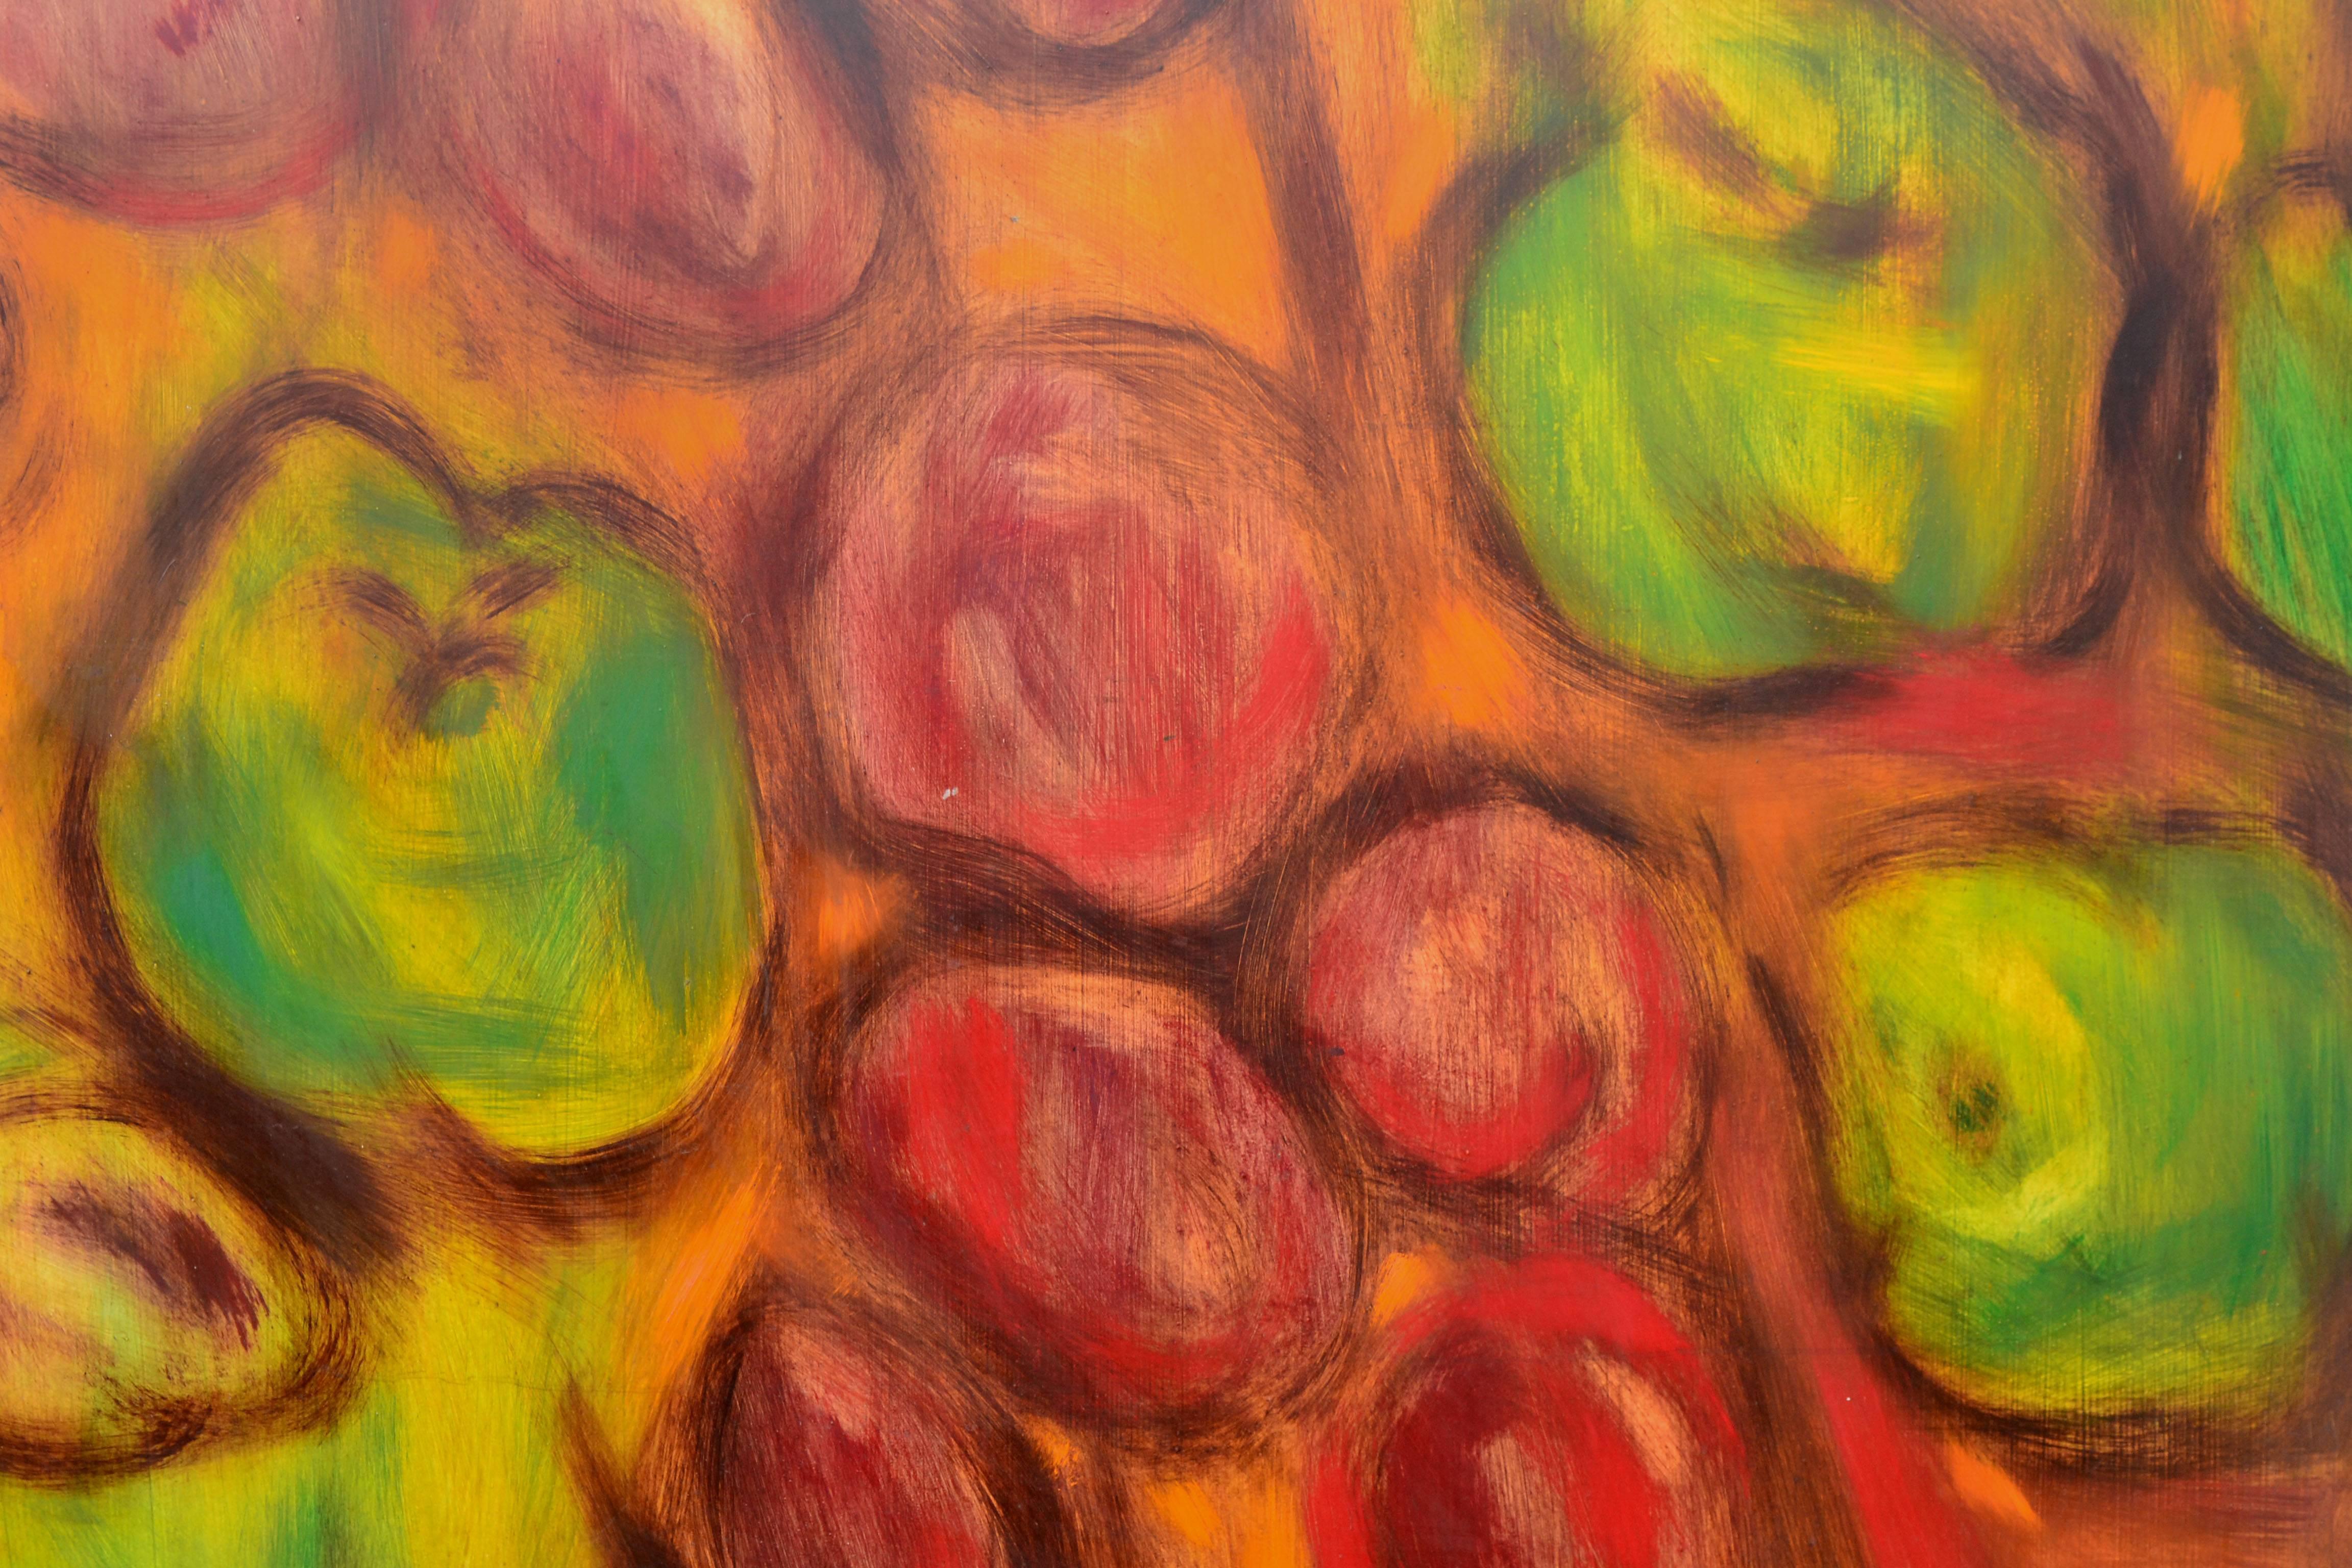 Apples and Plums - Abstract Expressionist Painting by James McCray